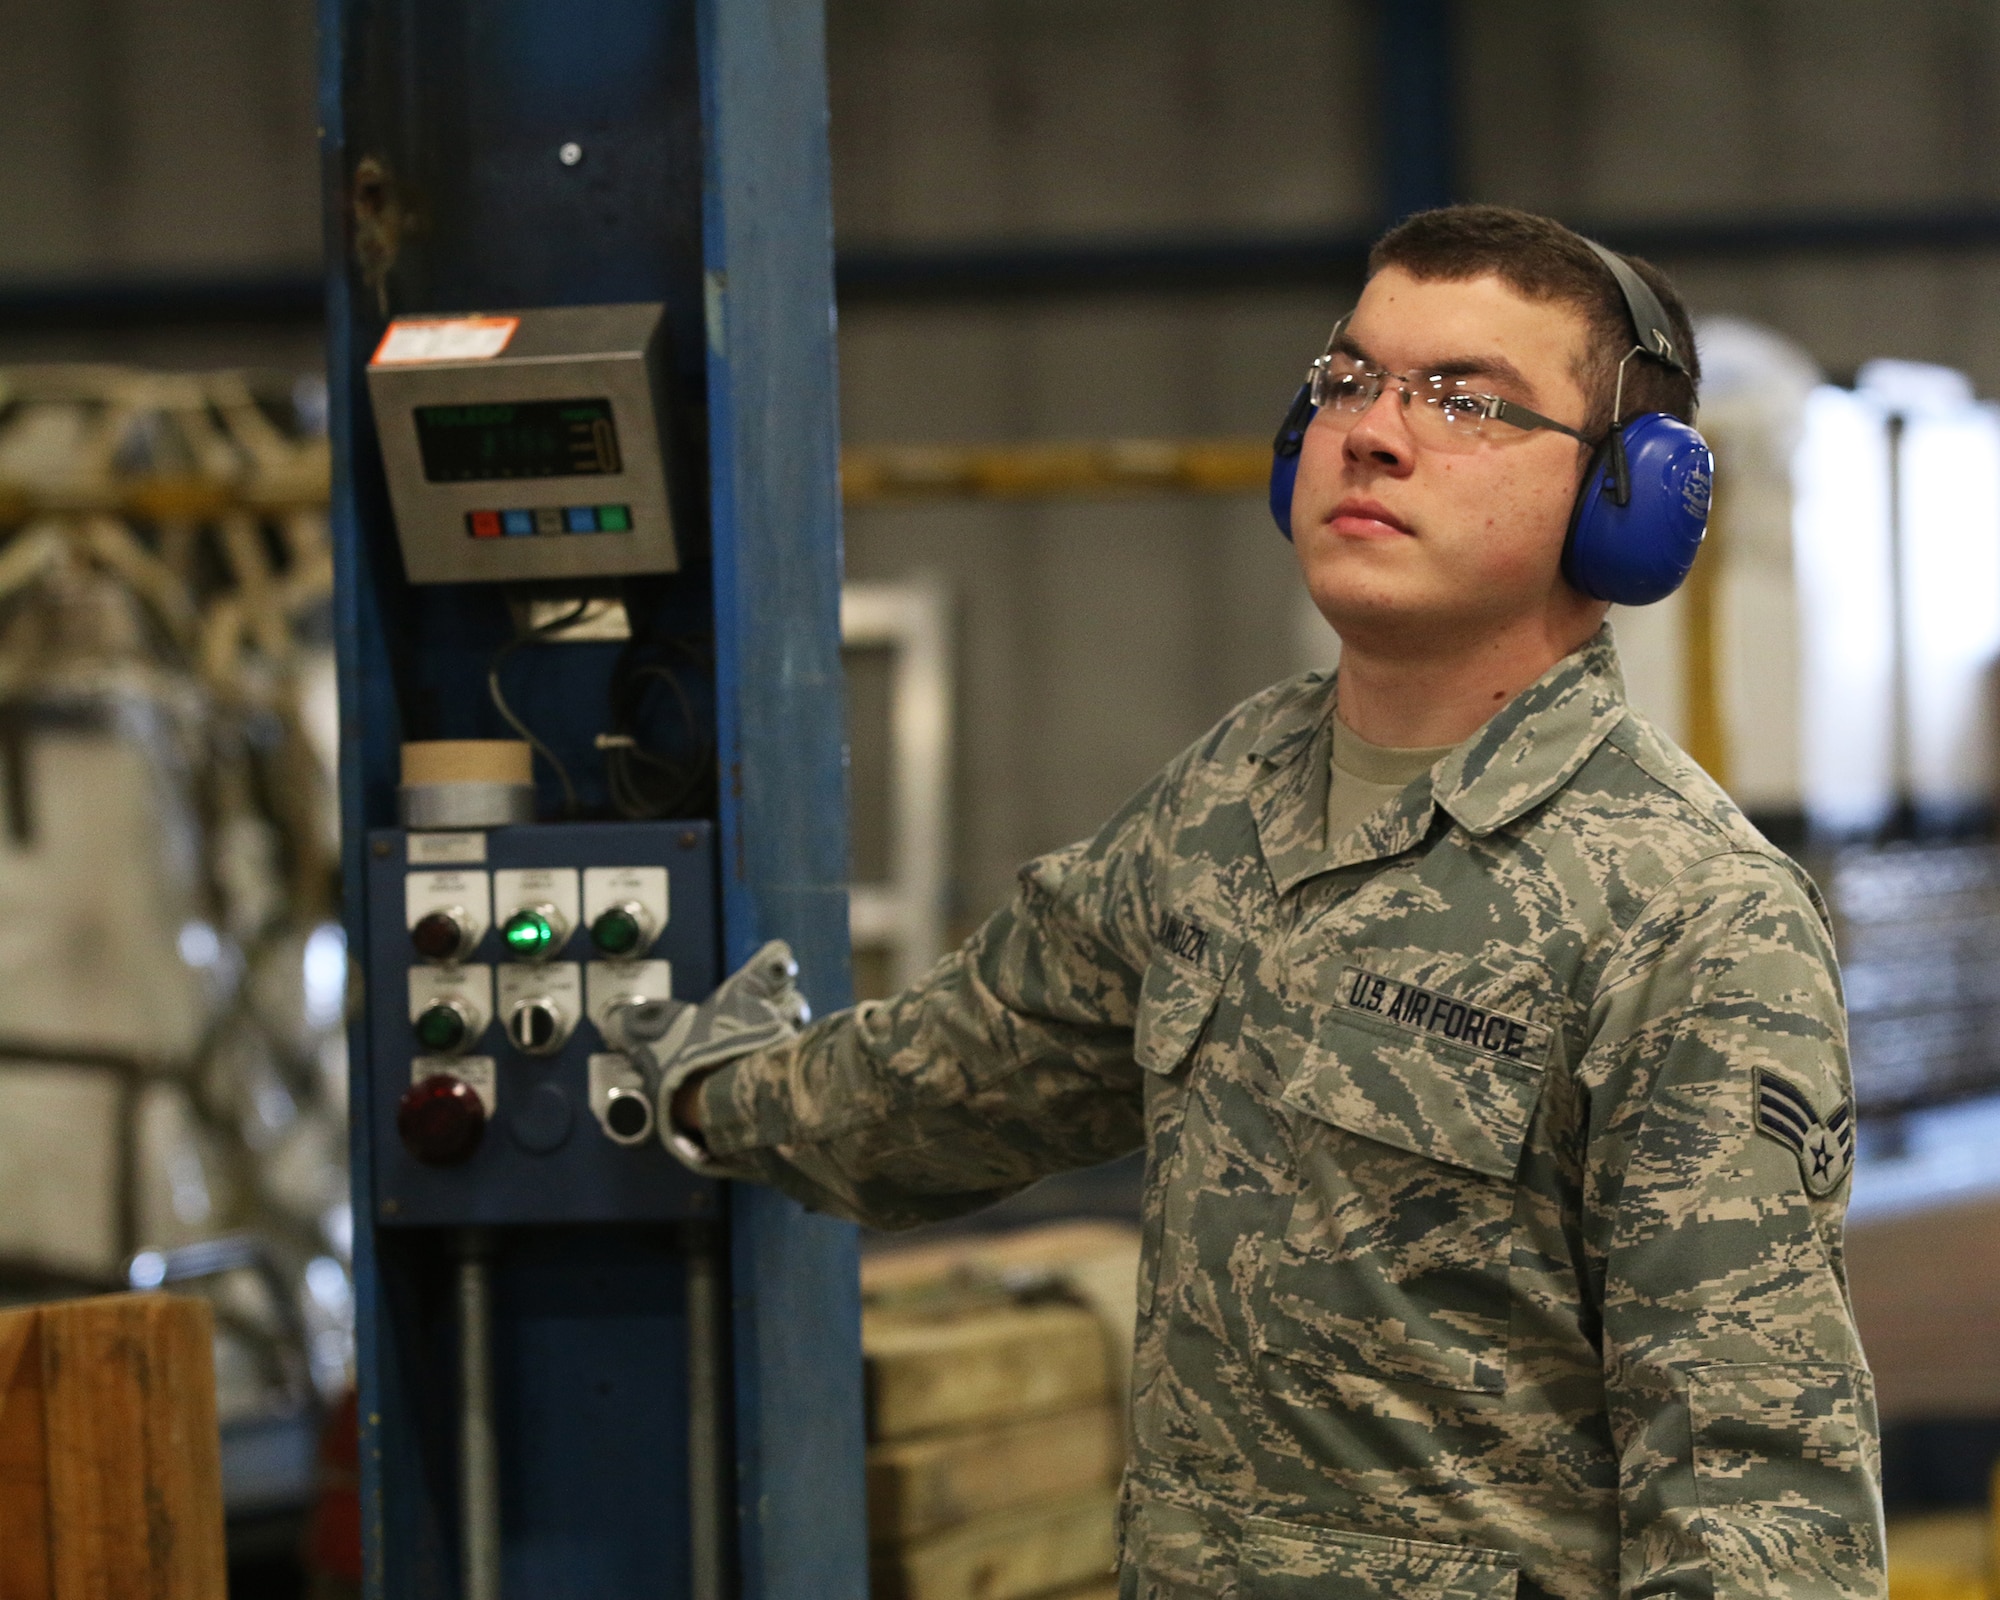 WRIGHT-PATTERSON AIR FORCE BASE, Ohio – Senior Airman Nicholas Giannuzzi, 87th Aerial Port Squadron cargo processor, operates a 463L pallet system, which is used for moving large amounts of cargo during training held on the Nov. 6, 2015 unit training assembly. (U.S. Air Force photo /Tech. Sgt. Patrick O’Reilly)